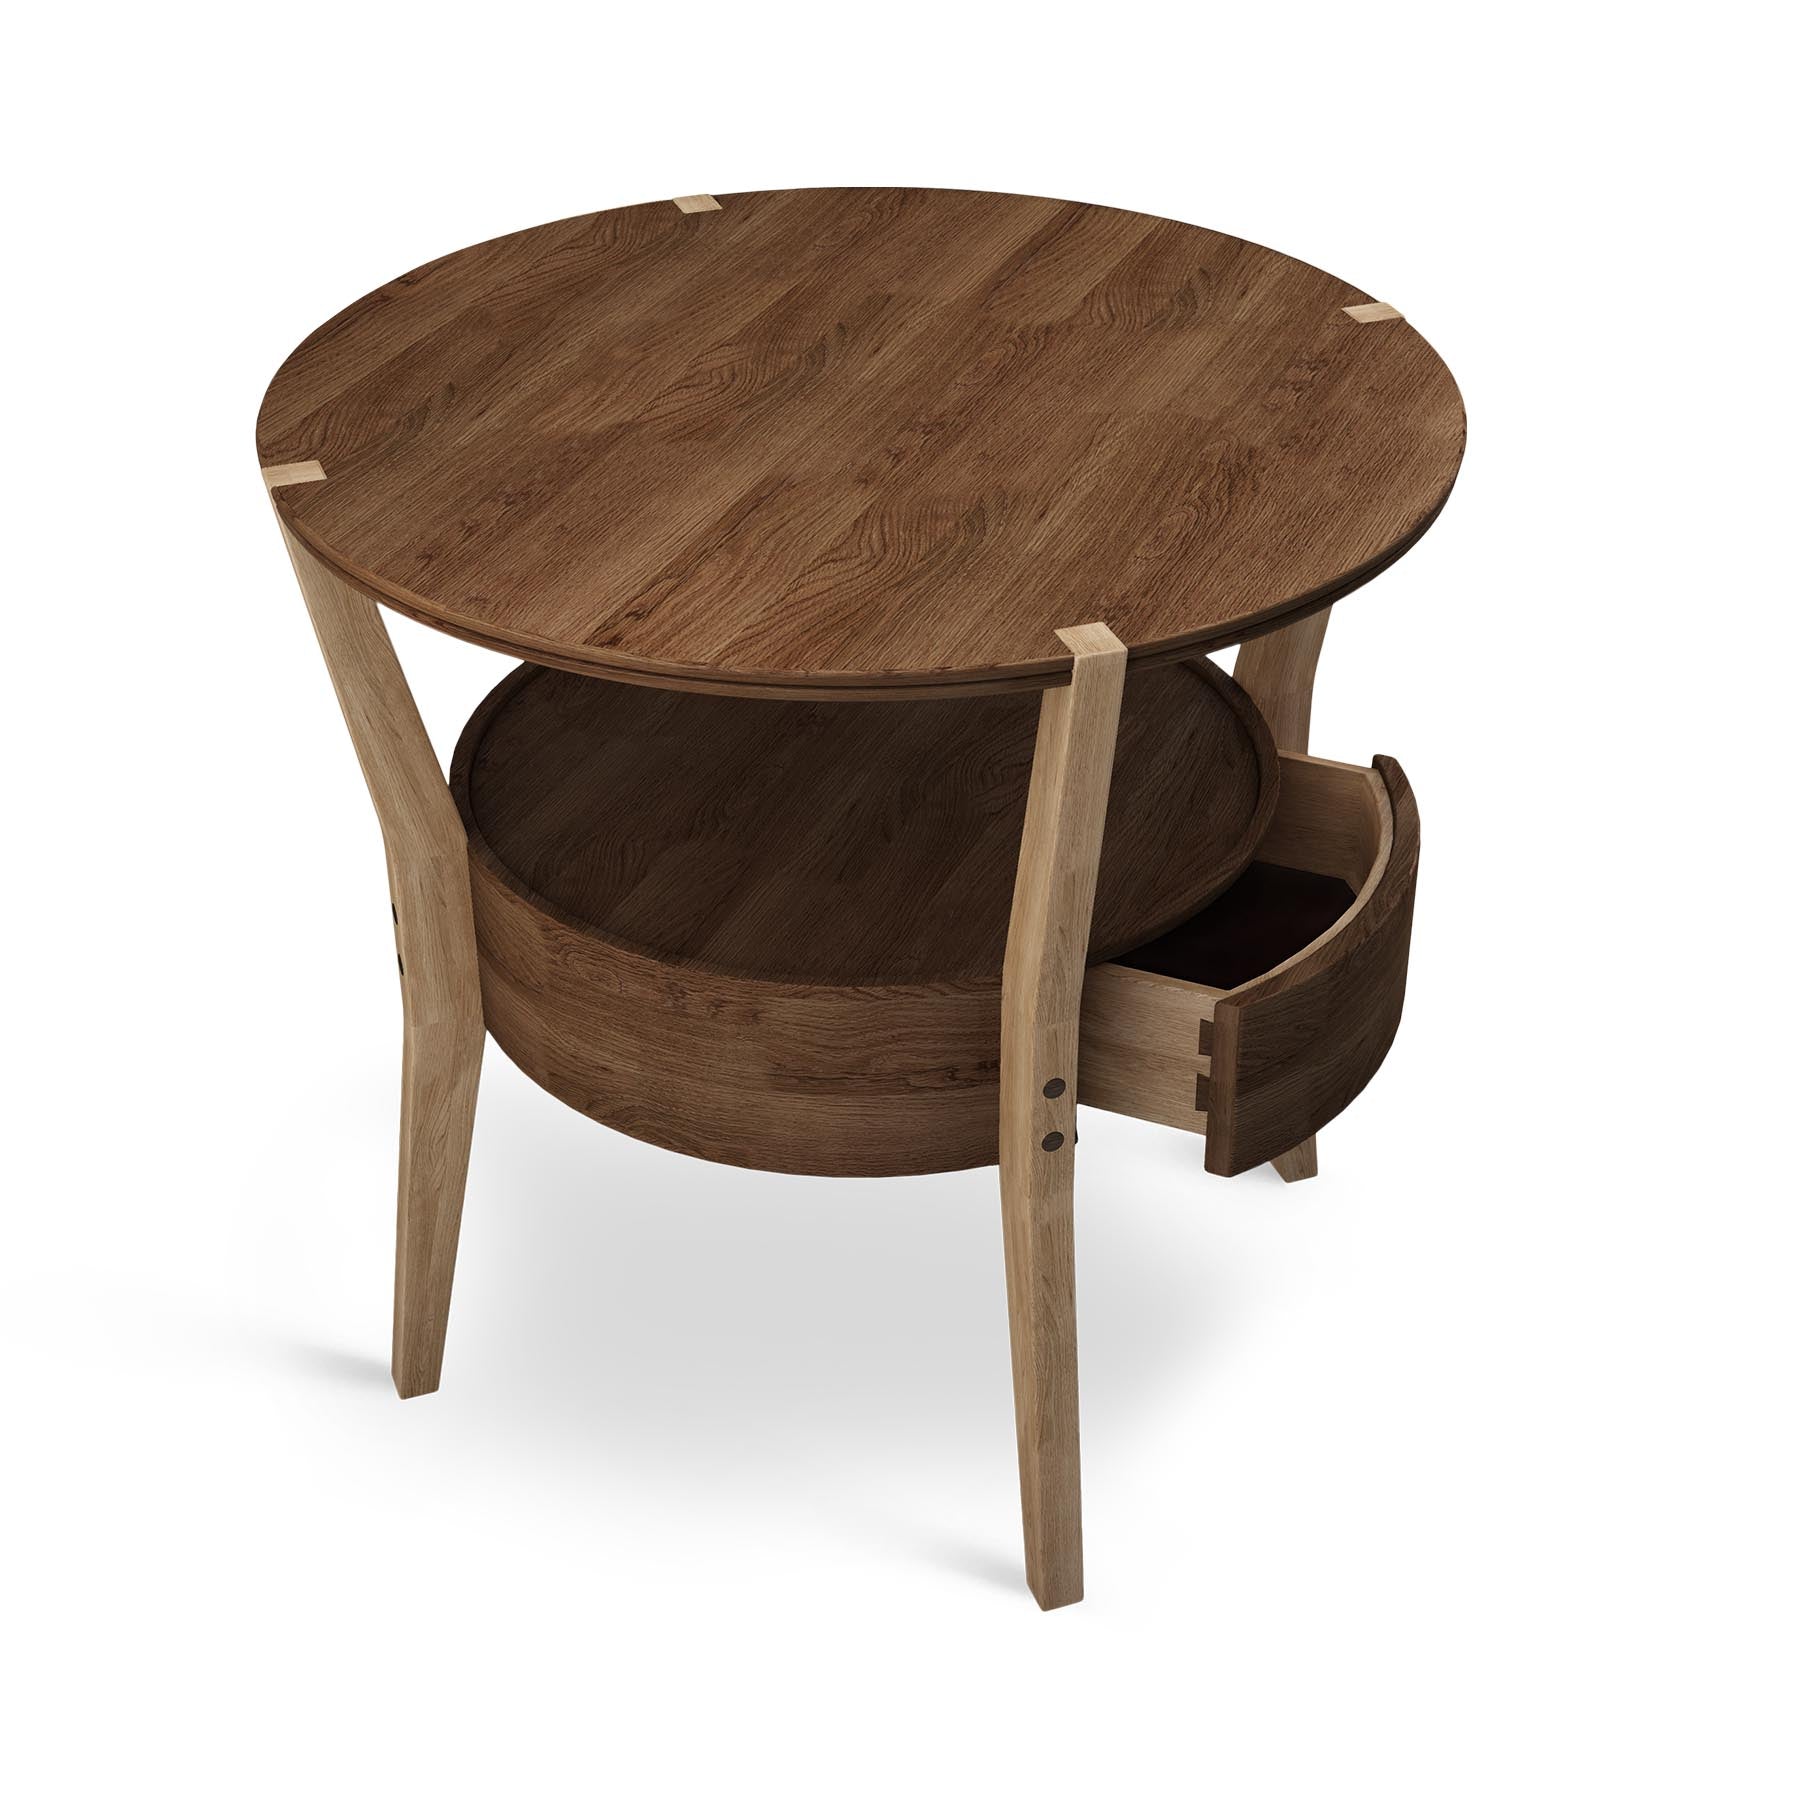 CROMWELL - SIDE TABLE | Modern Furniture + Decor